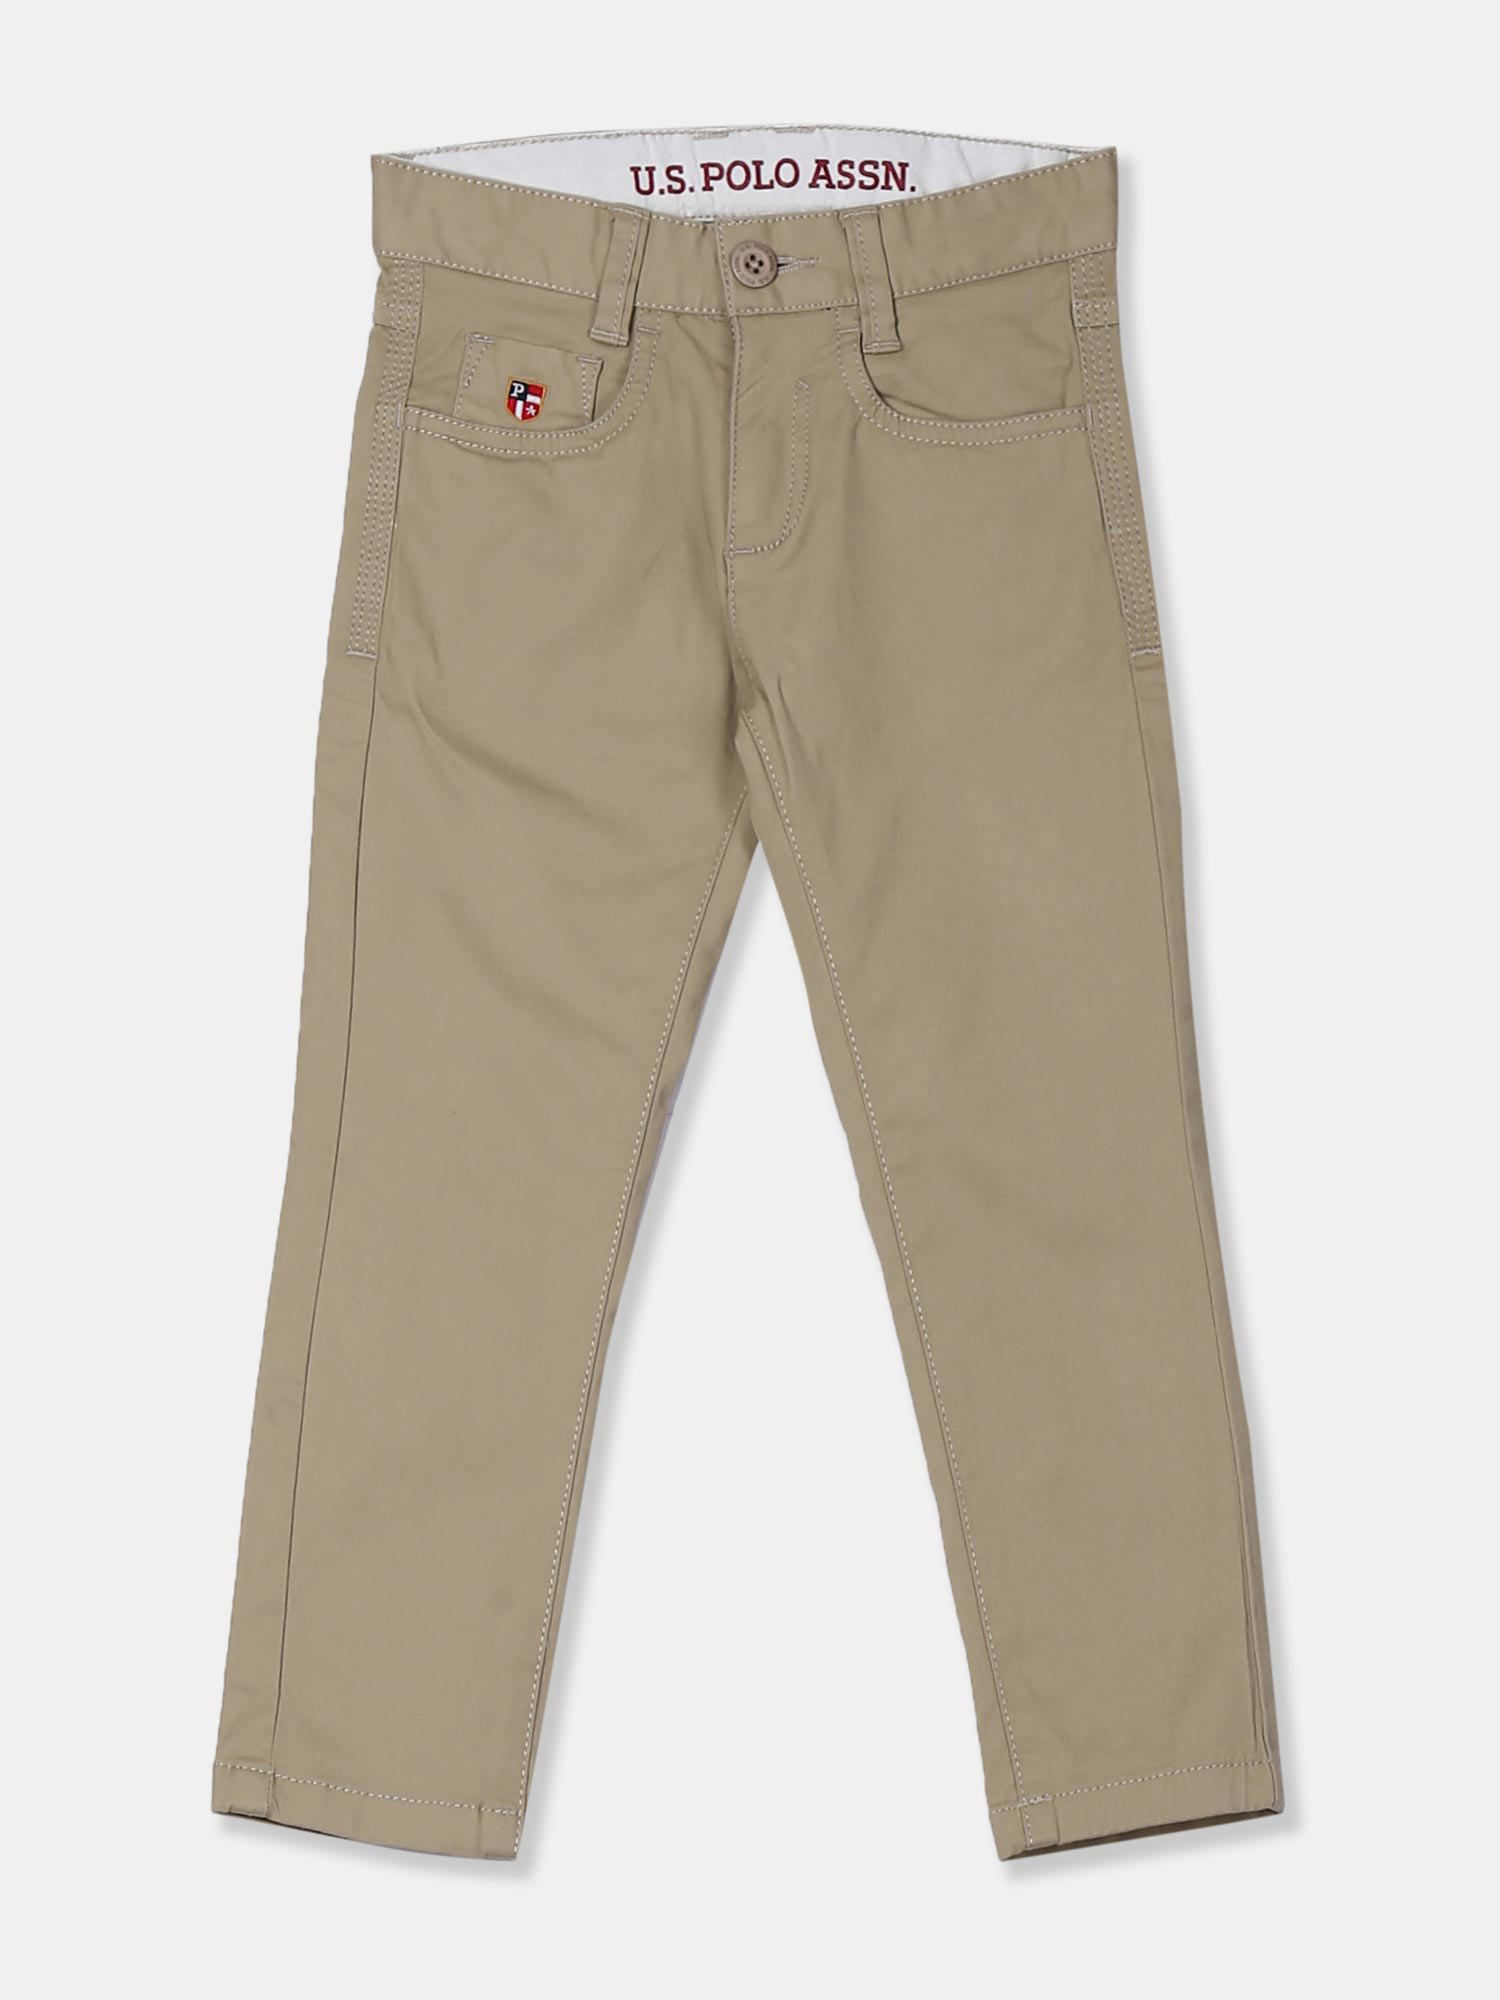 US POLO ASSN Boys Flat Front Trousers  Beige 910 Years Buy US POLO  ASSN Boys Flat Front Trousers  Beige 910 Years Online at Best Price in  India  Nykaa